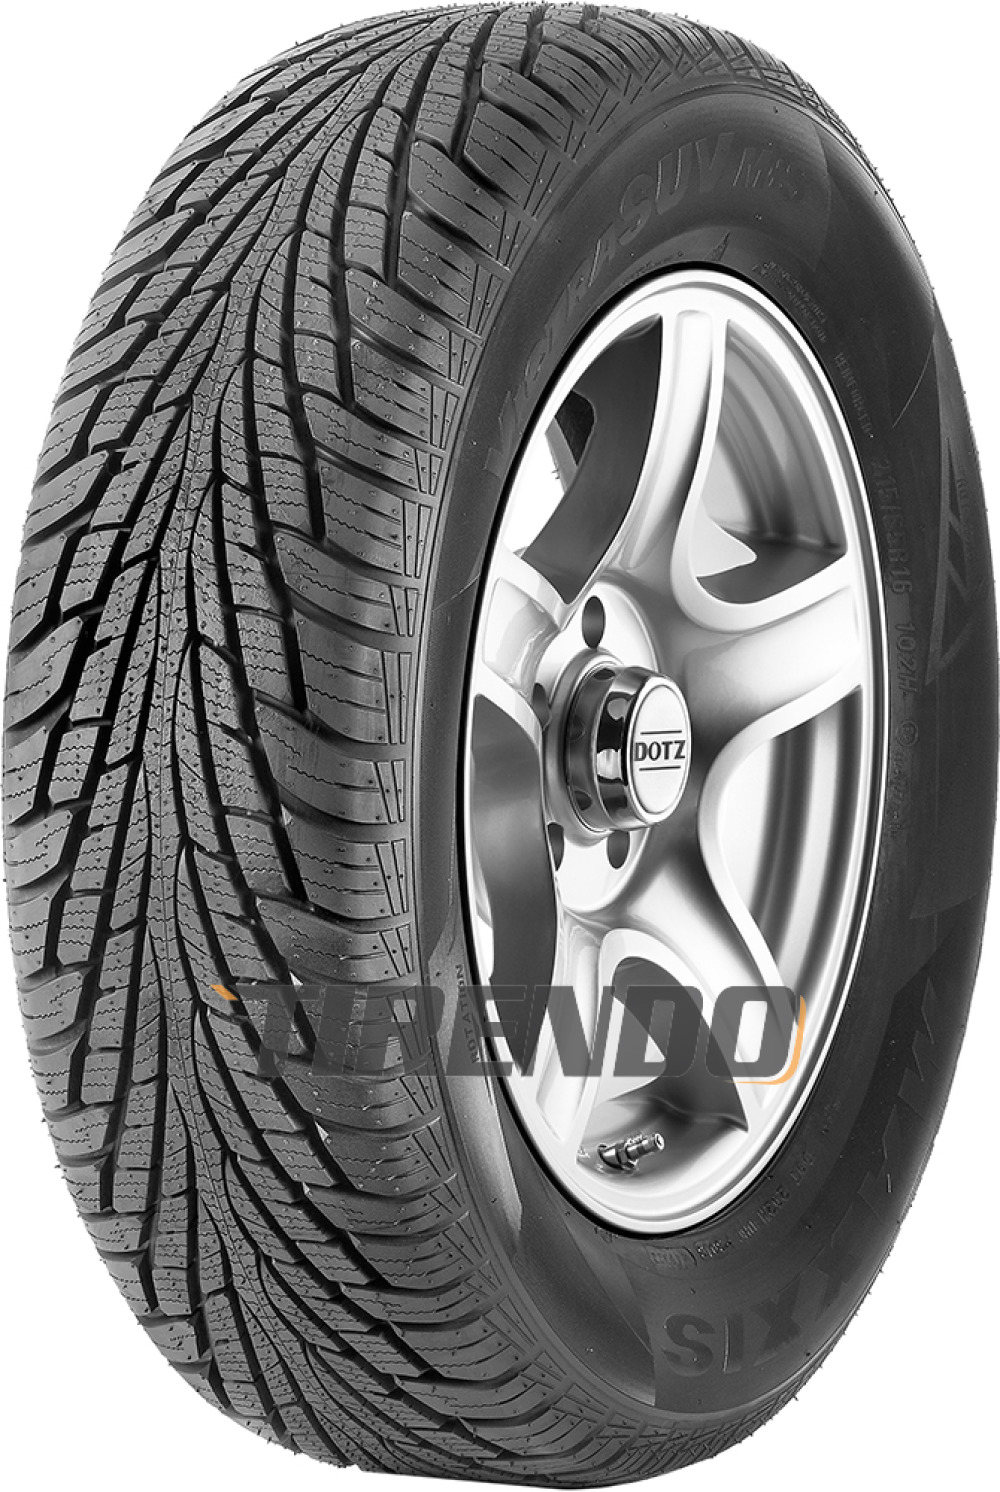 Image of Maxxis Victra SUV MA-SAS ( 205/80 R16 104T XL )